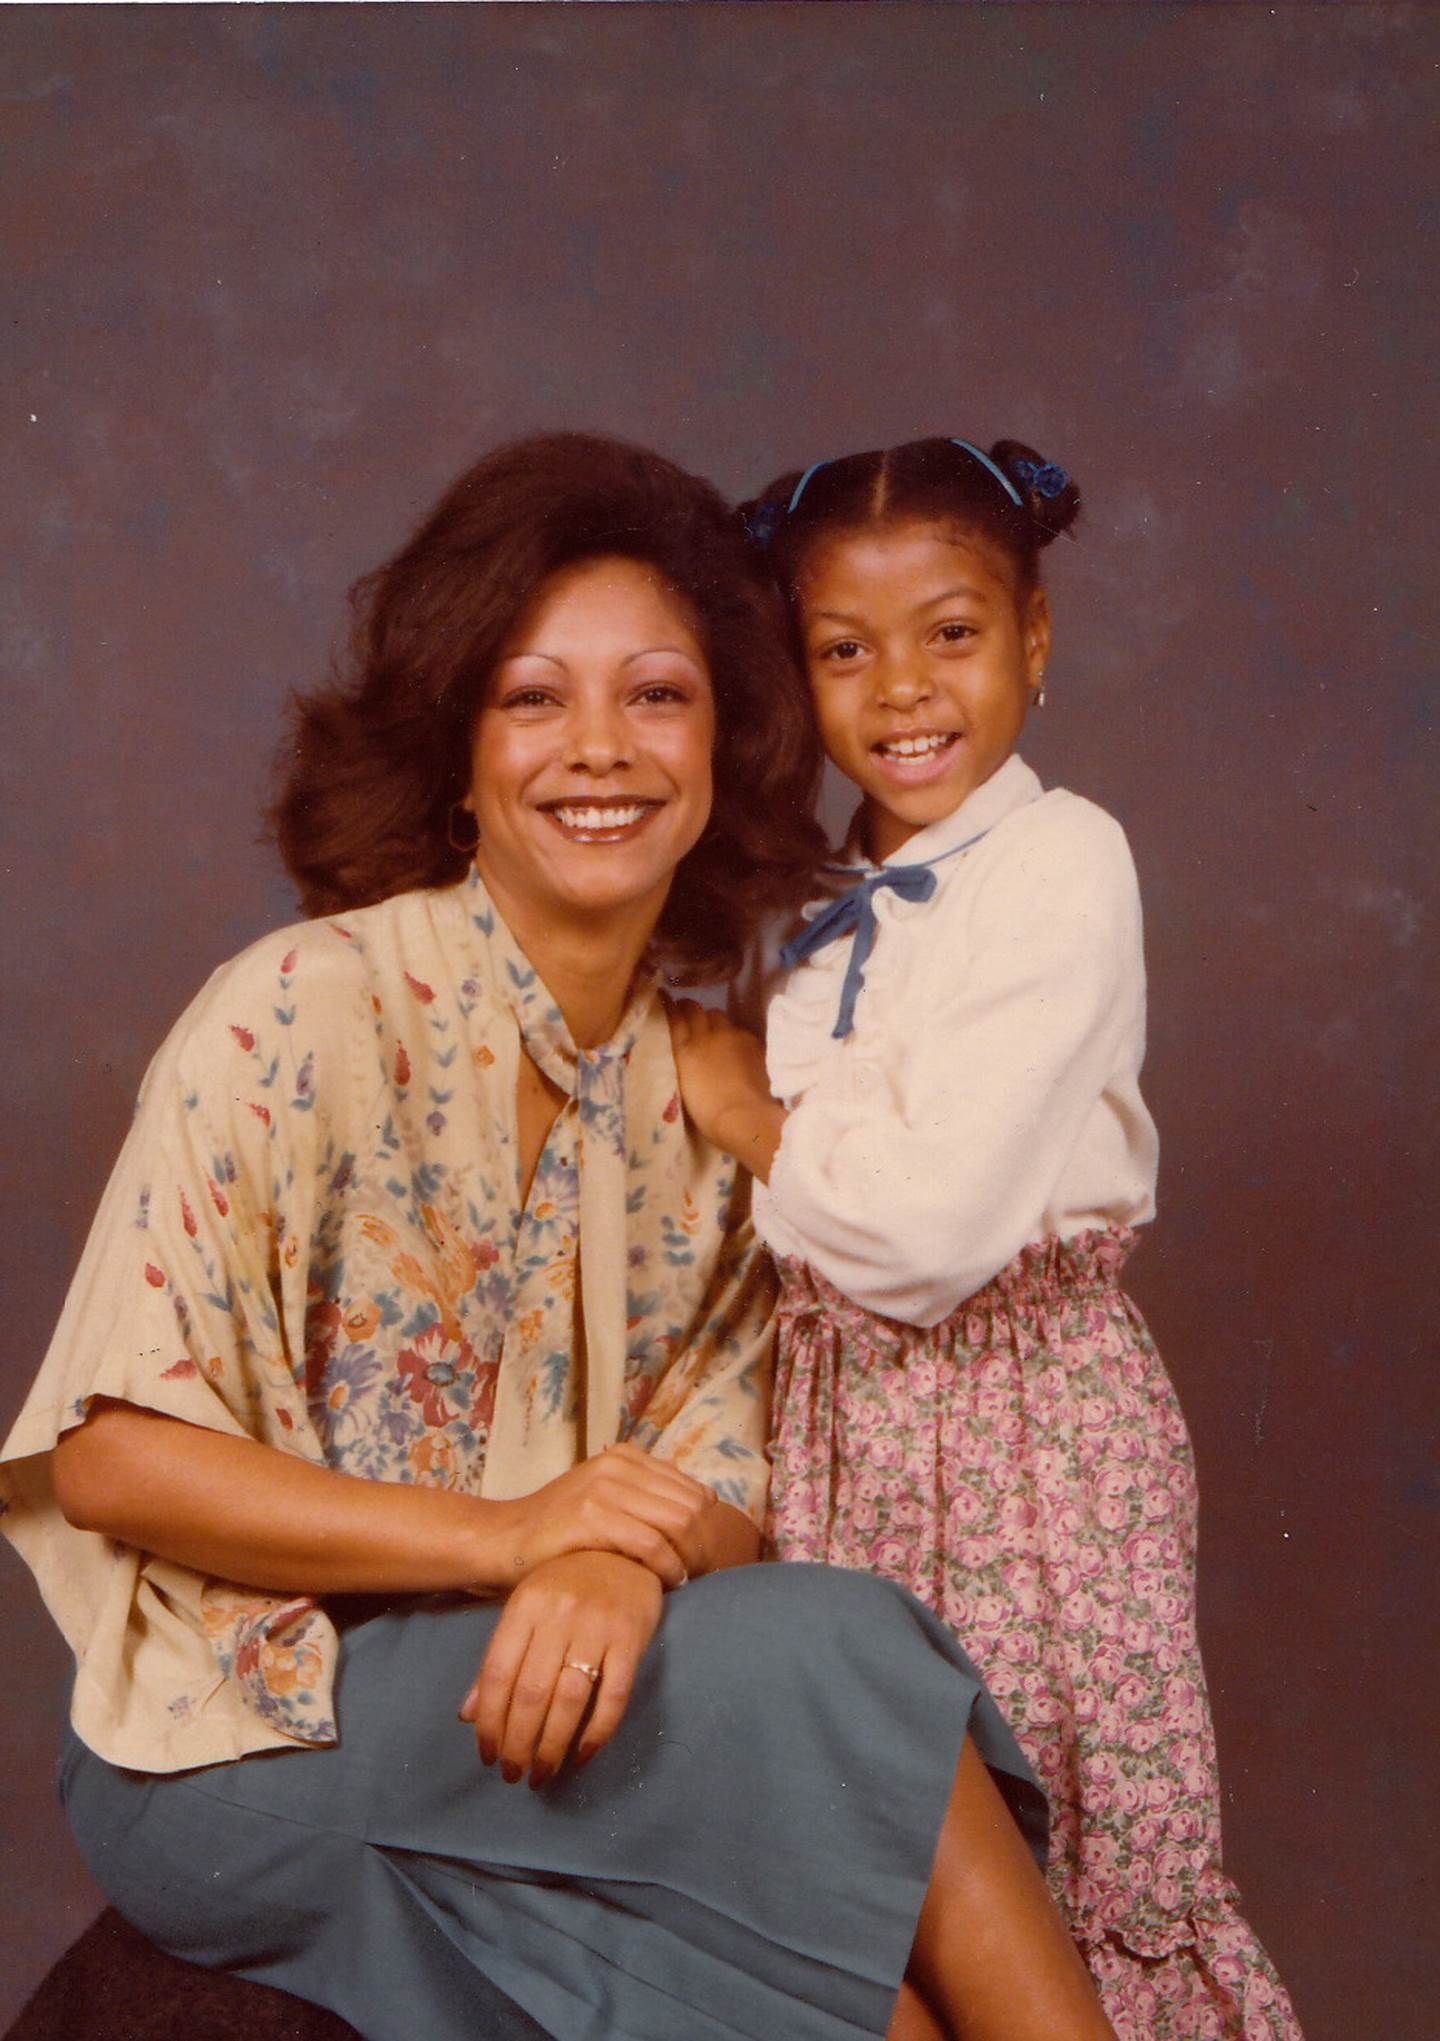 Taraji P. Henson as a child with her mom